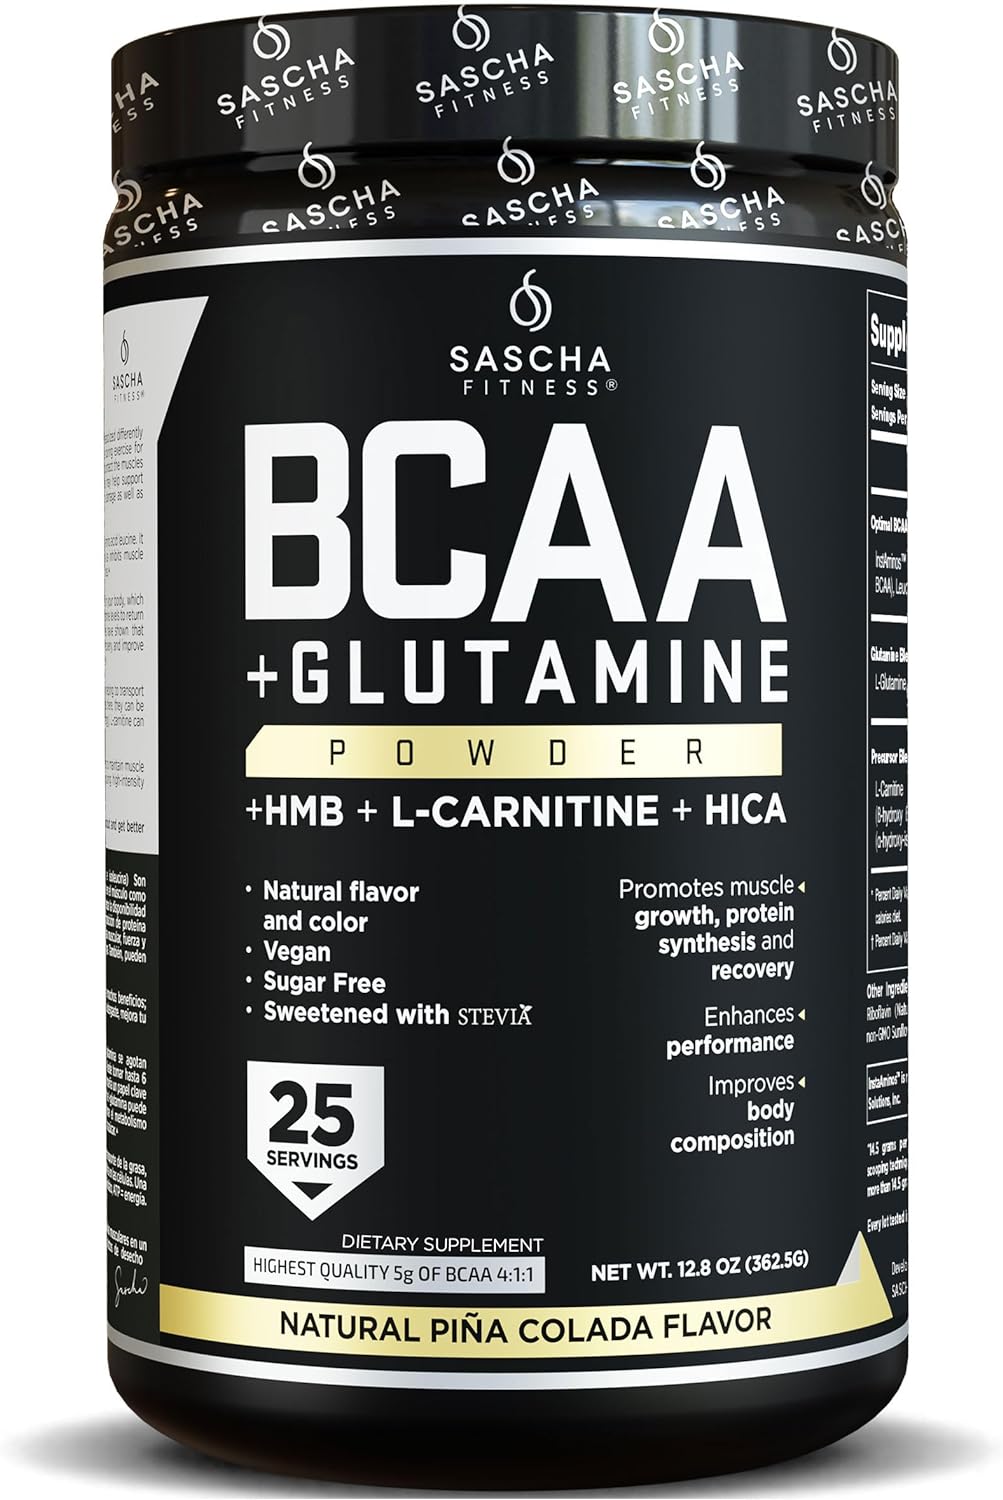 SASCHA FITNESS BCAA 4:1:1 + Glutamine, HMB, L-Carnitine, HICA | Powerful and Instant Powder Blend with Branched Chain Amino Acids (BCAAs) for Pre, Intra and Post-Workout | Natural Pi¤a Colada,362.5g